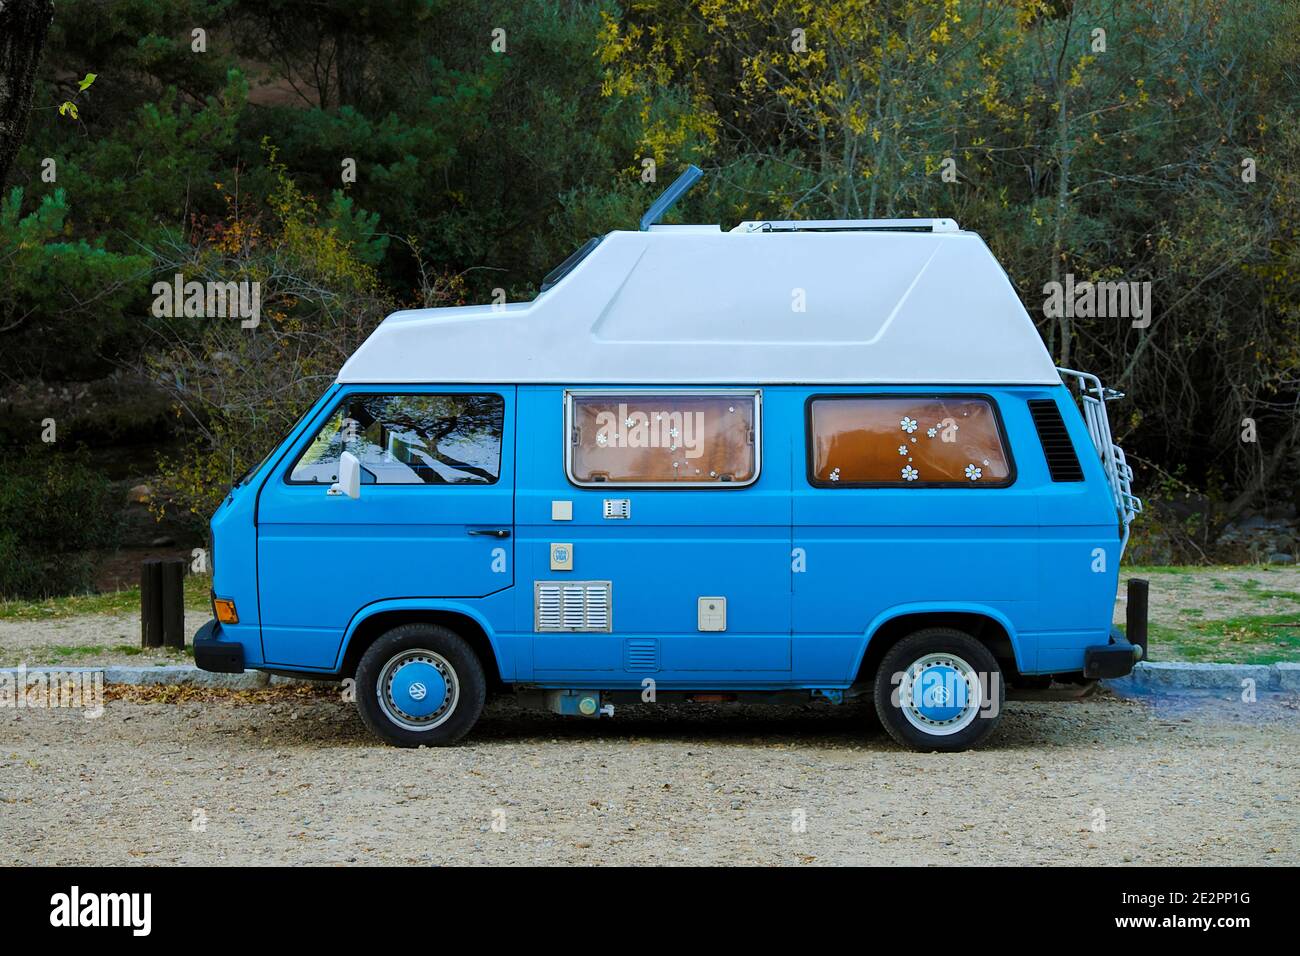 volkswagen t3 blue germany used – Search for your used car on the